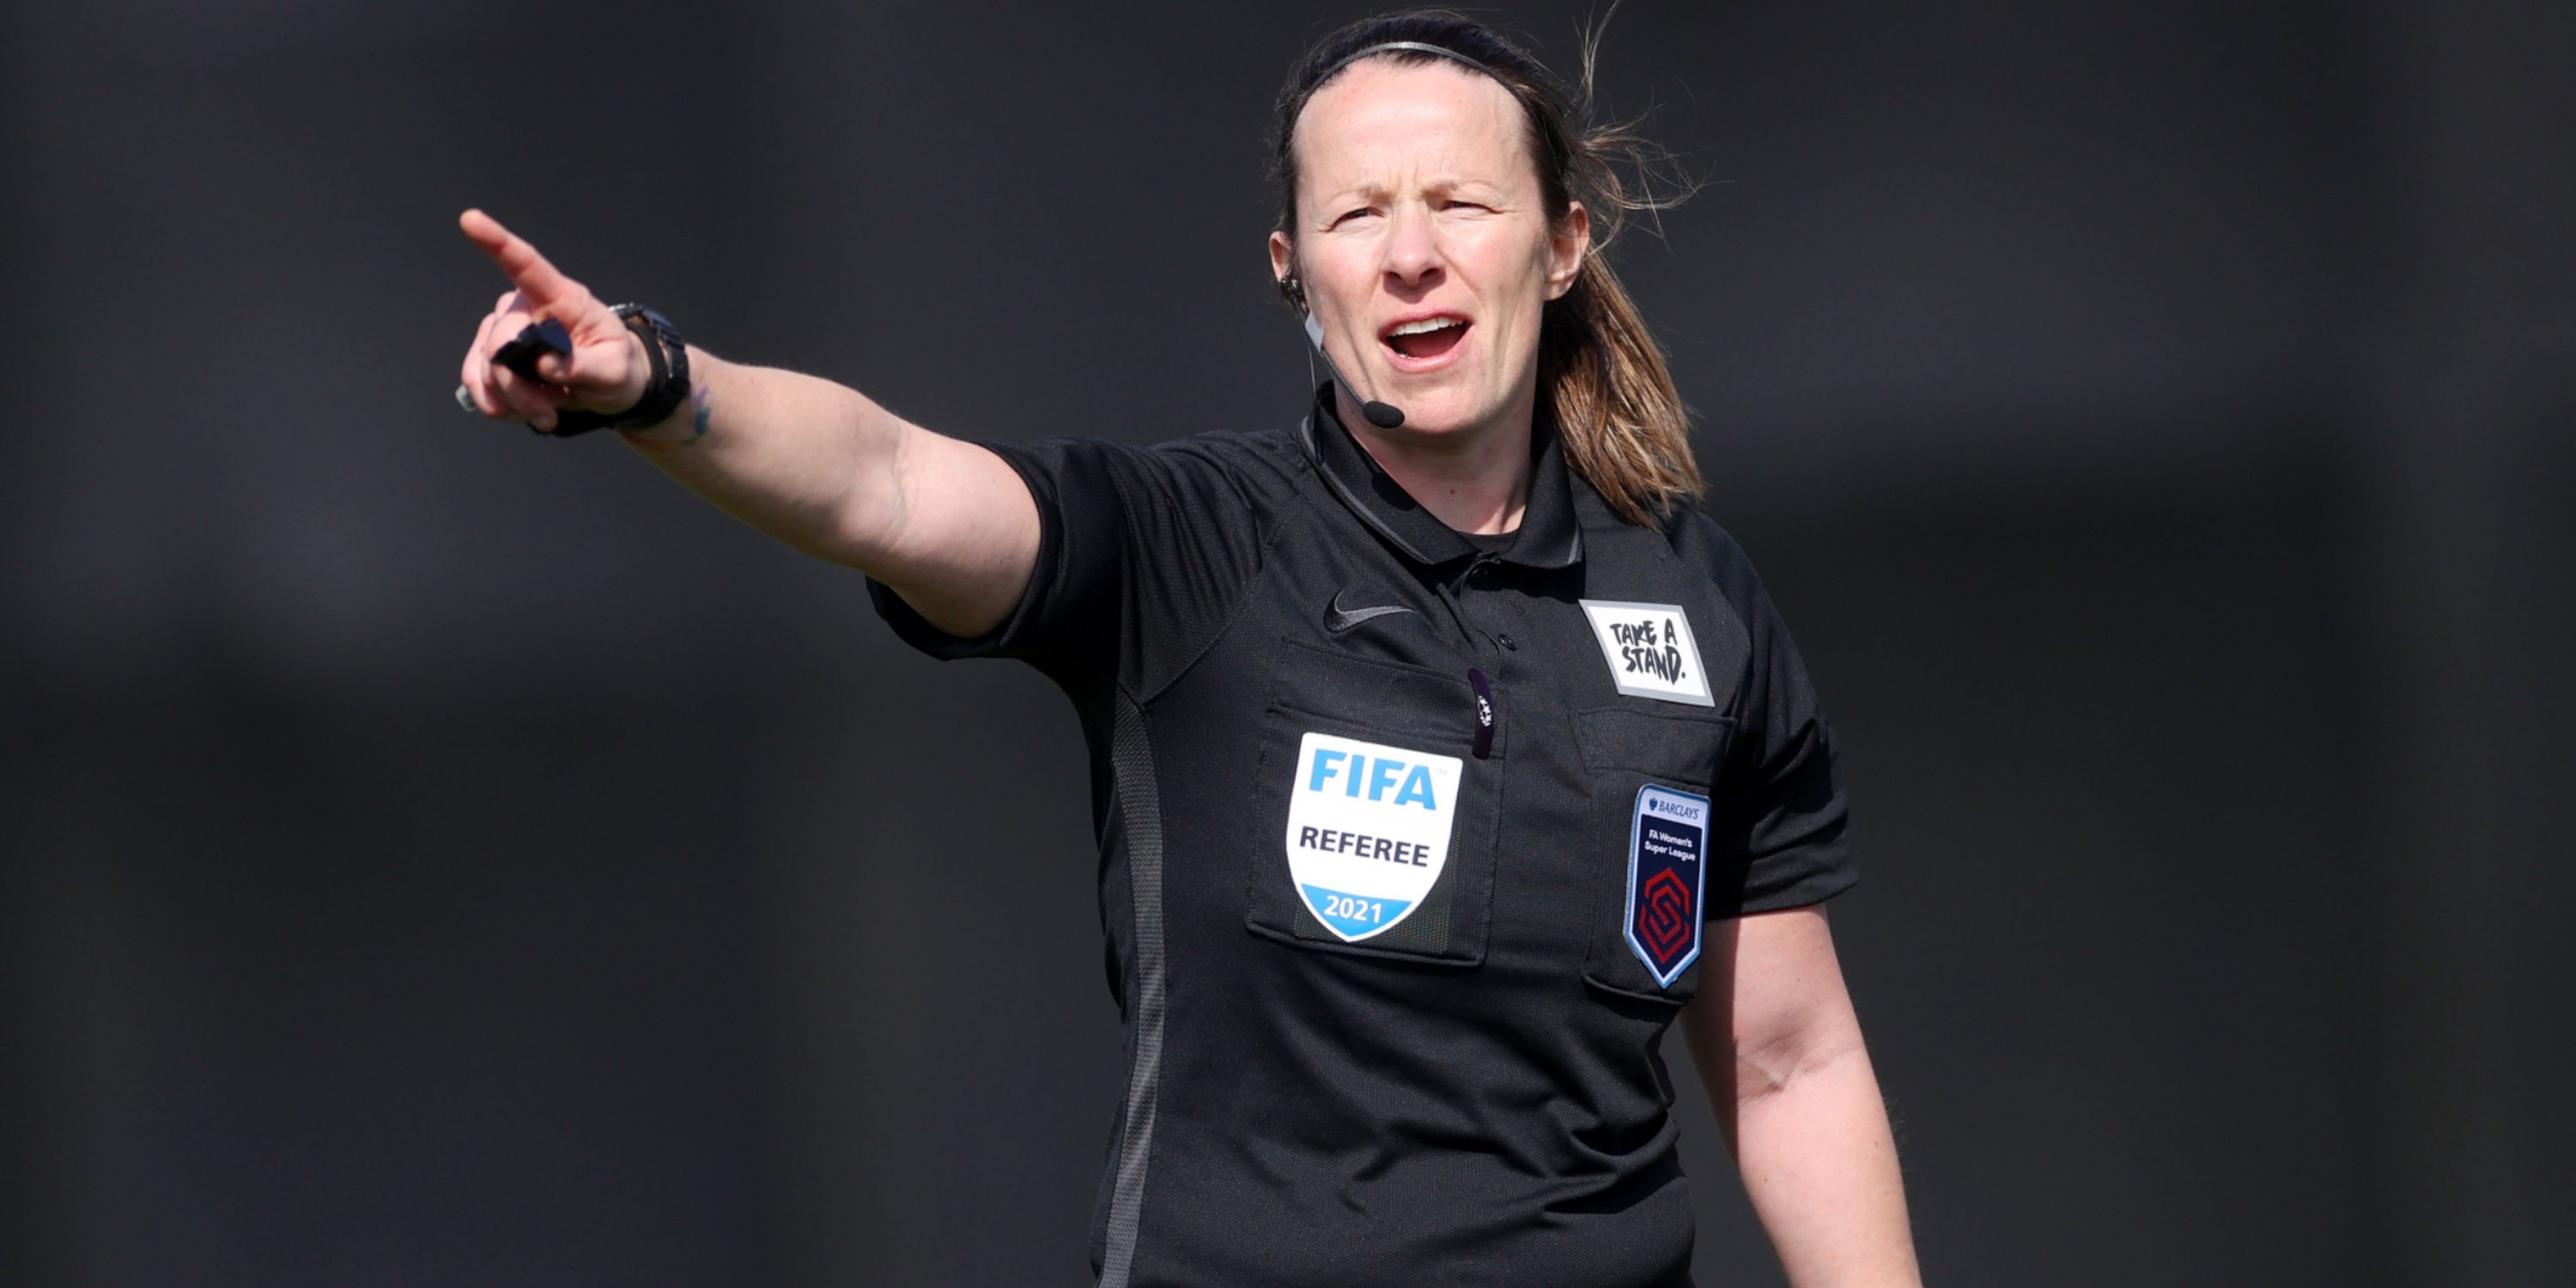 Stacey-Pearson-WSL-referee